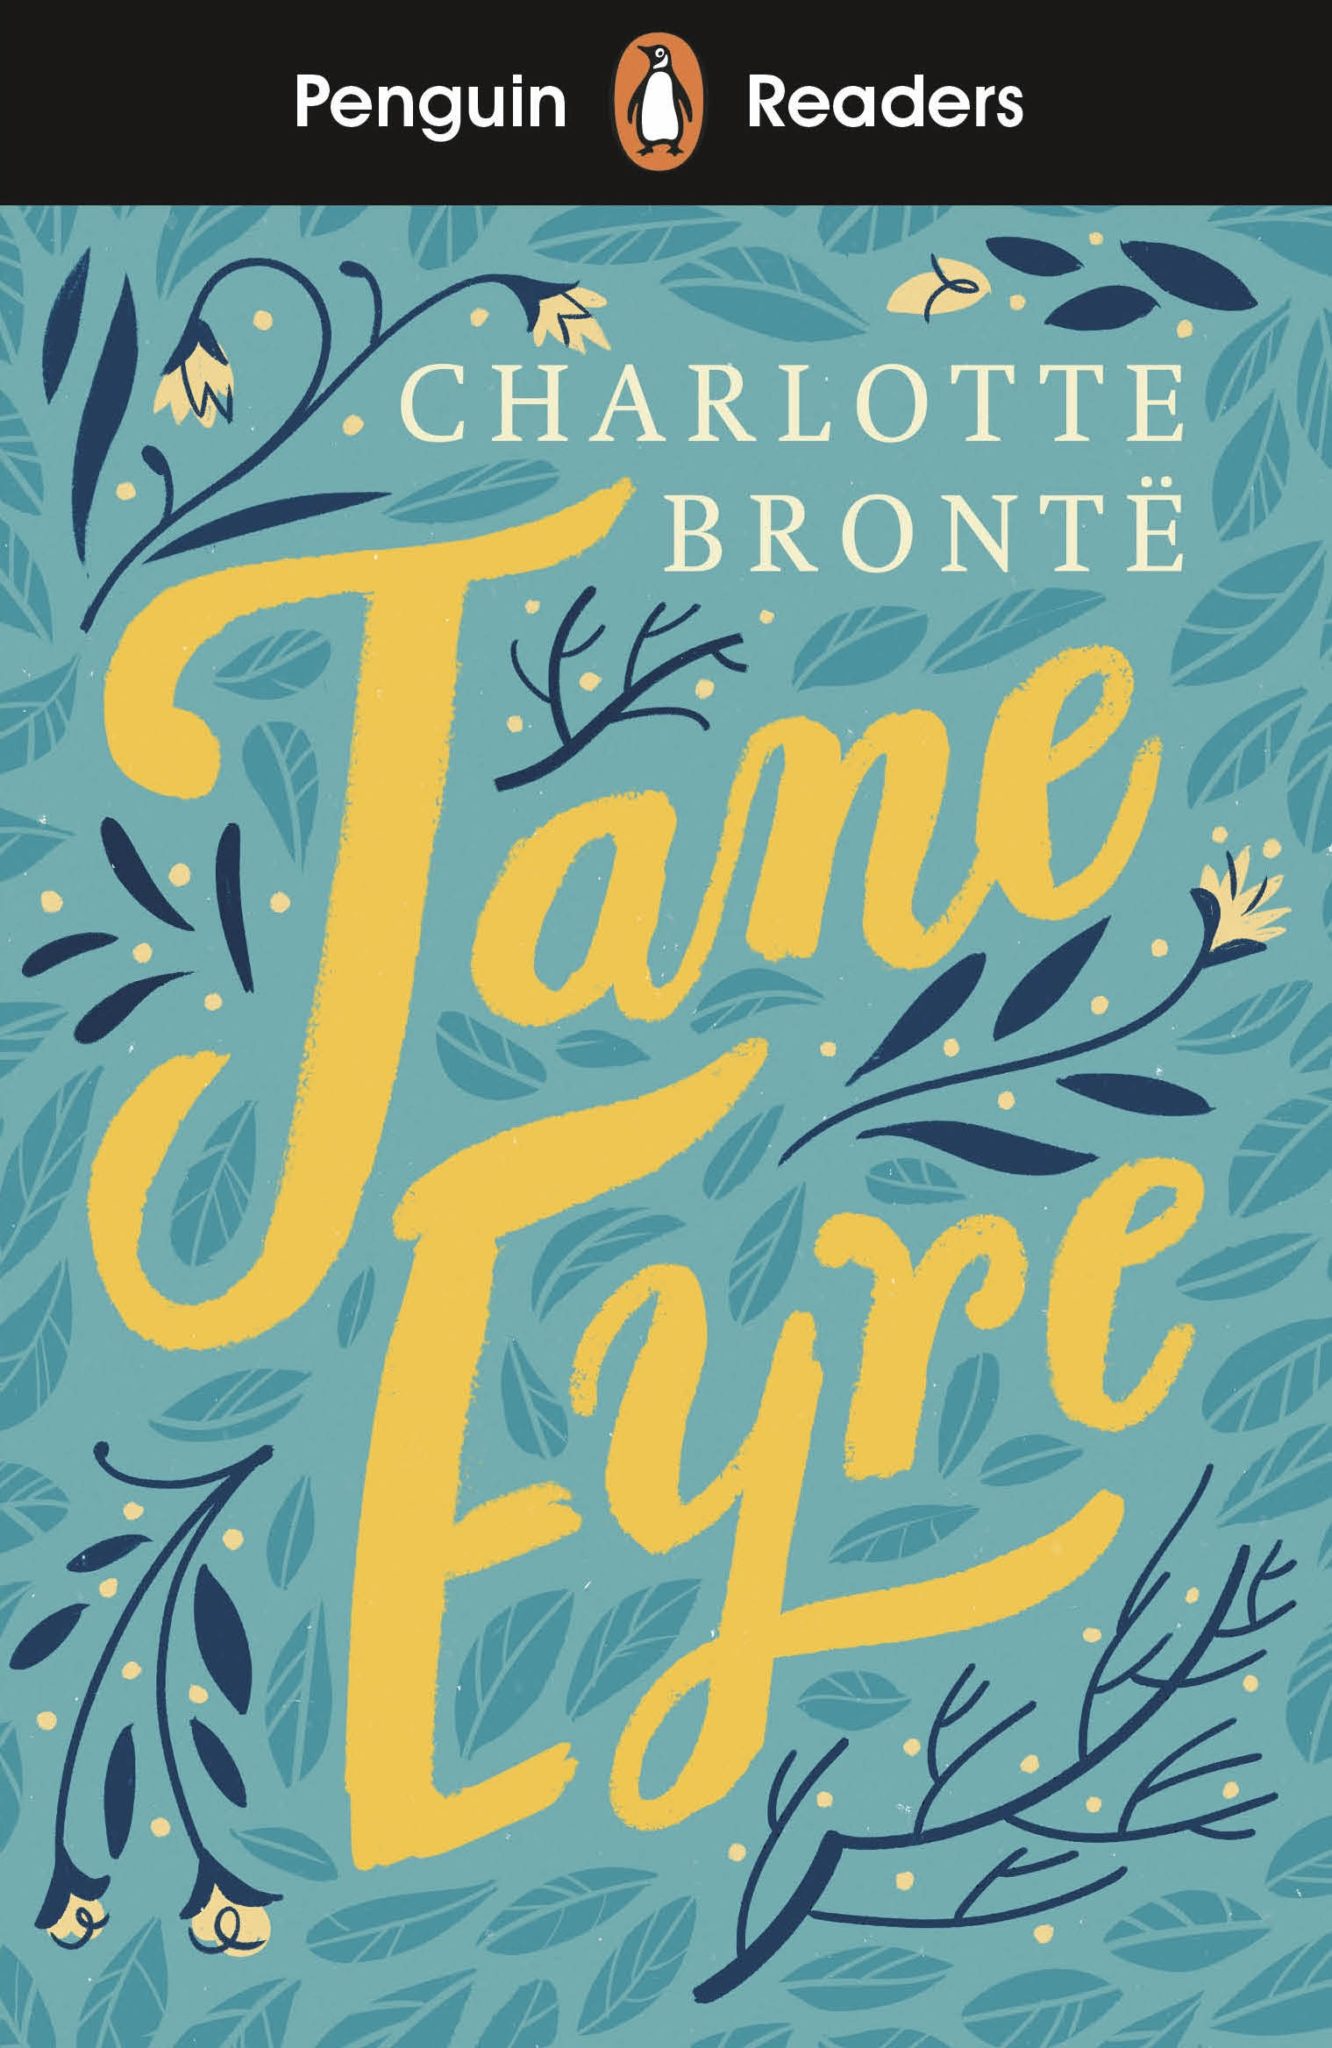 book review of jane eyre